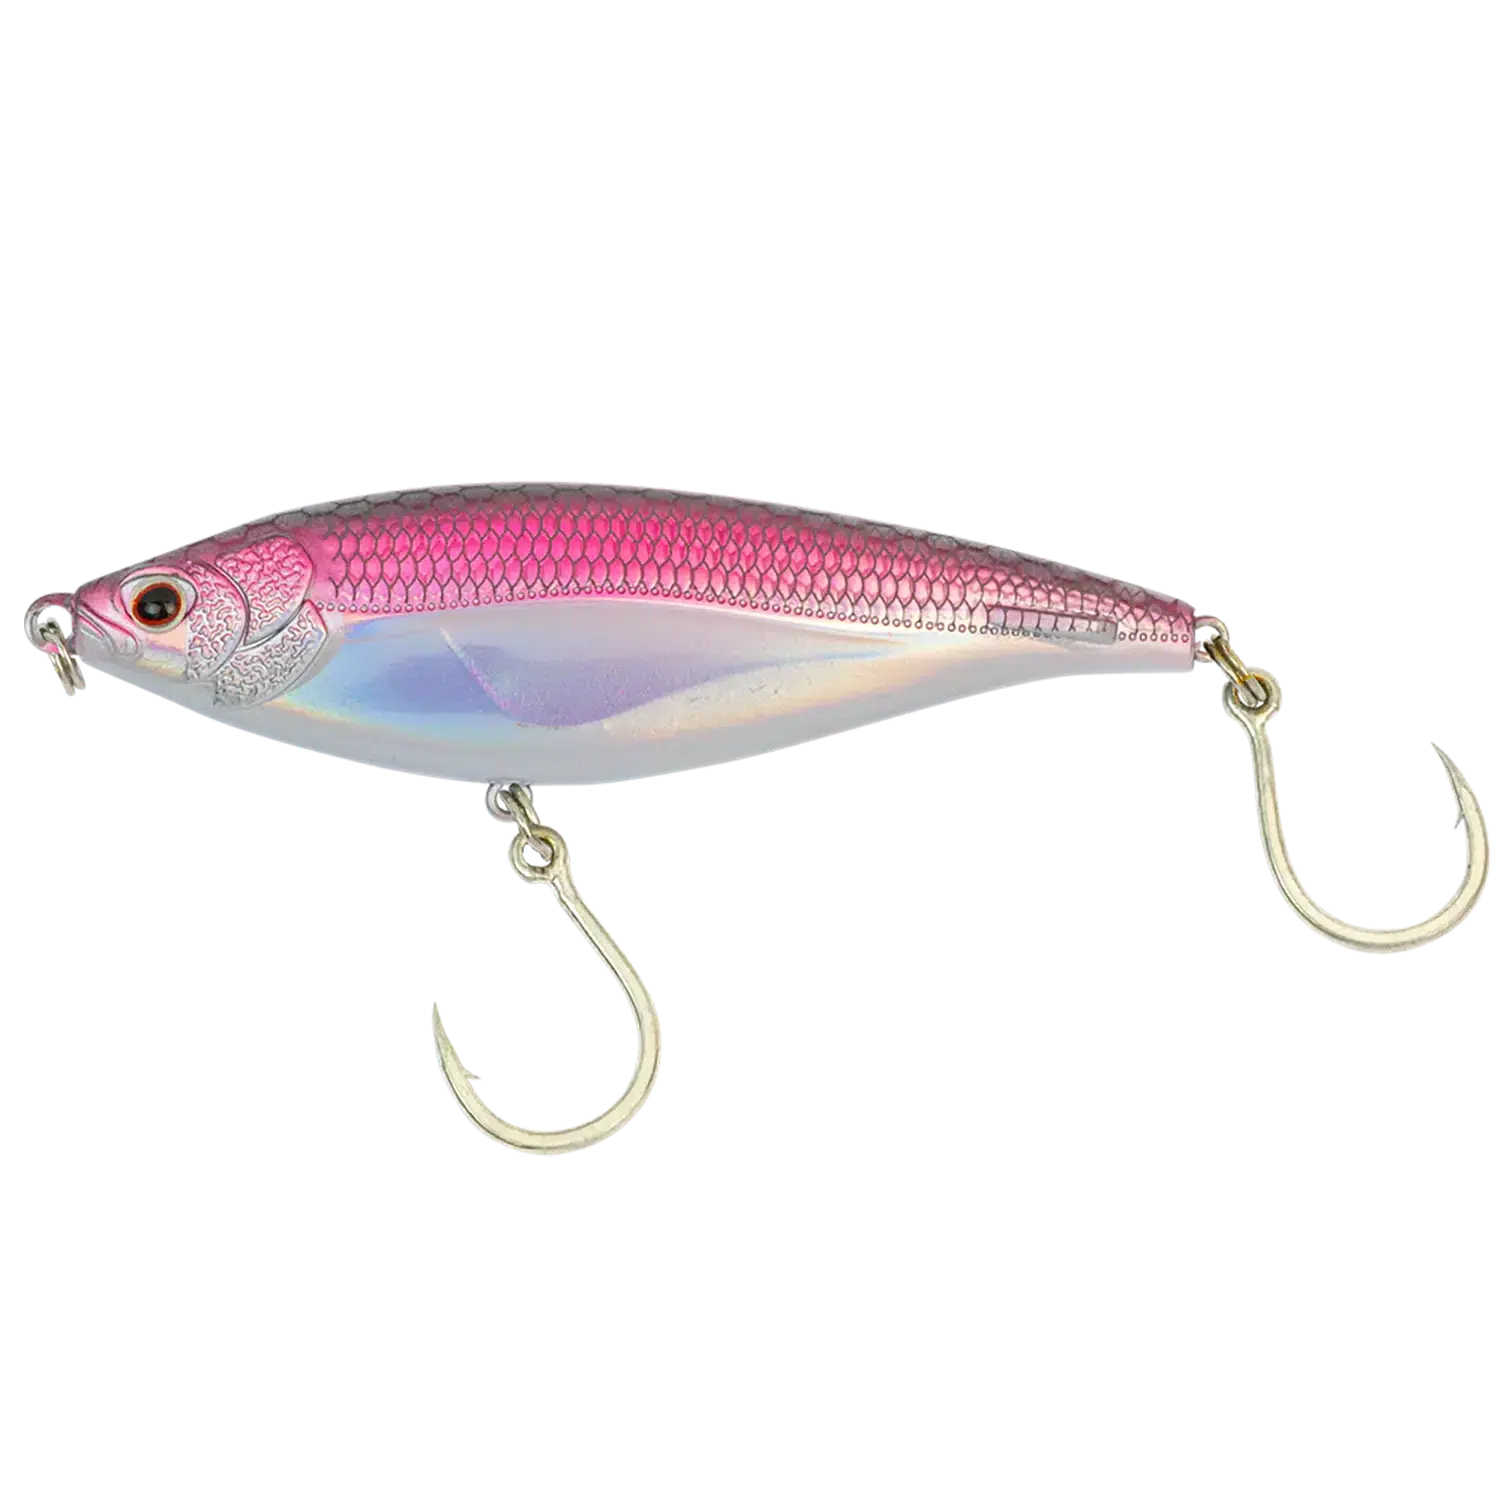 Nomad Madscad Auto Tune Slow Sink 90-Lure - Poppers, Stickbaits & Pencils-Nomad-Pink Chrome-Fishing Station